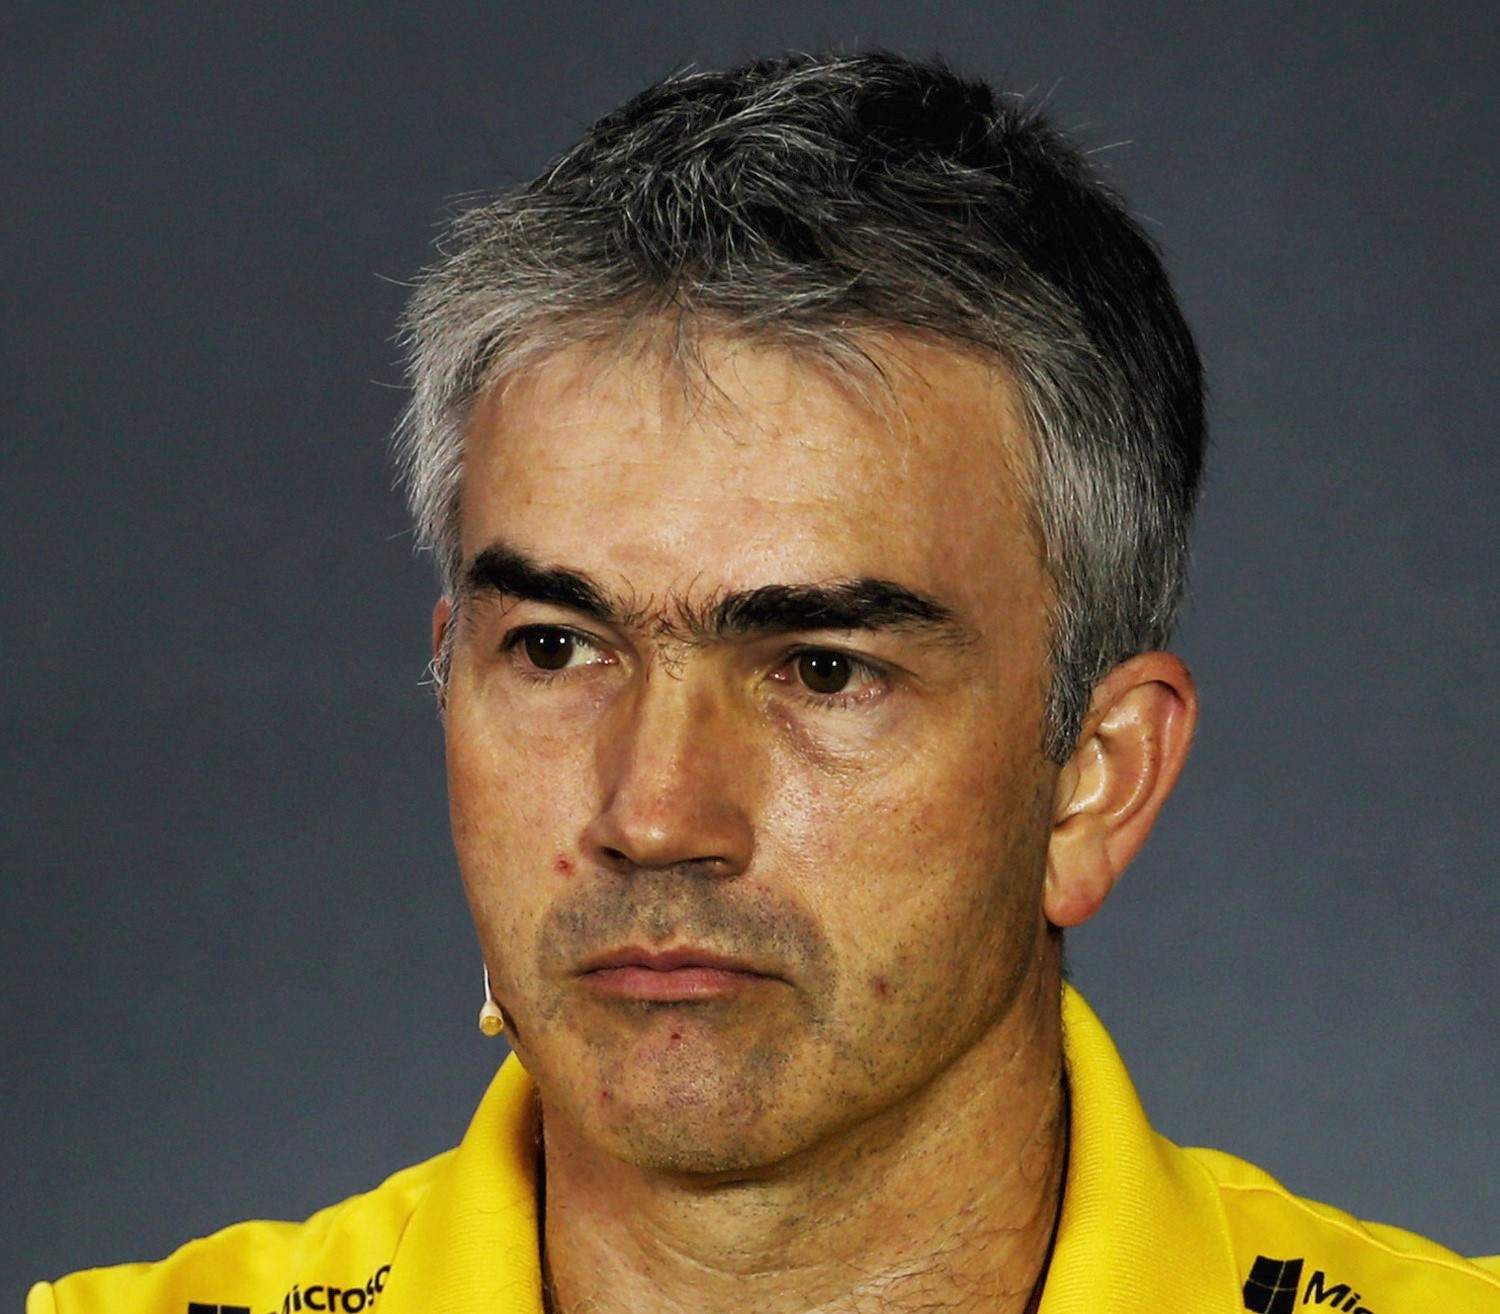 Nick Chester leaving Renault